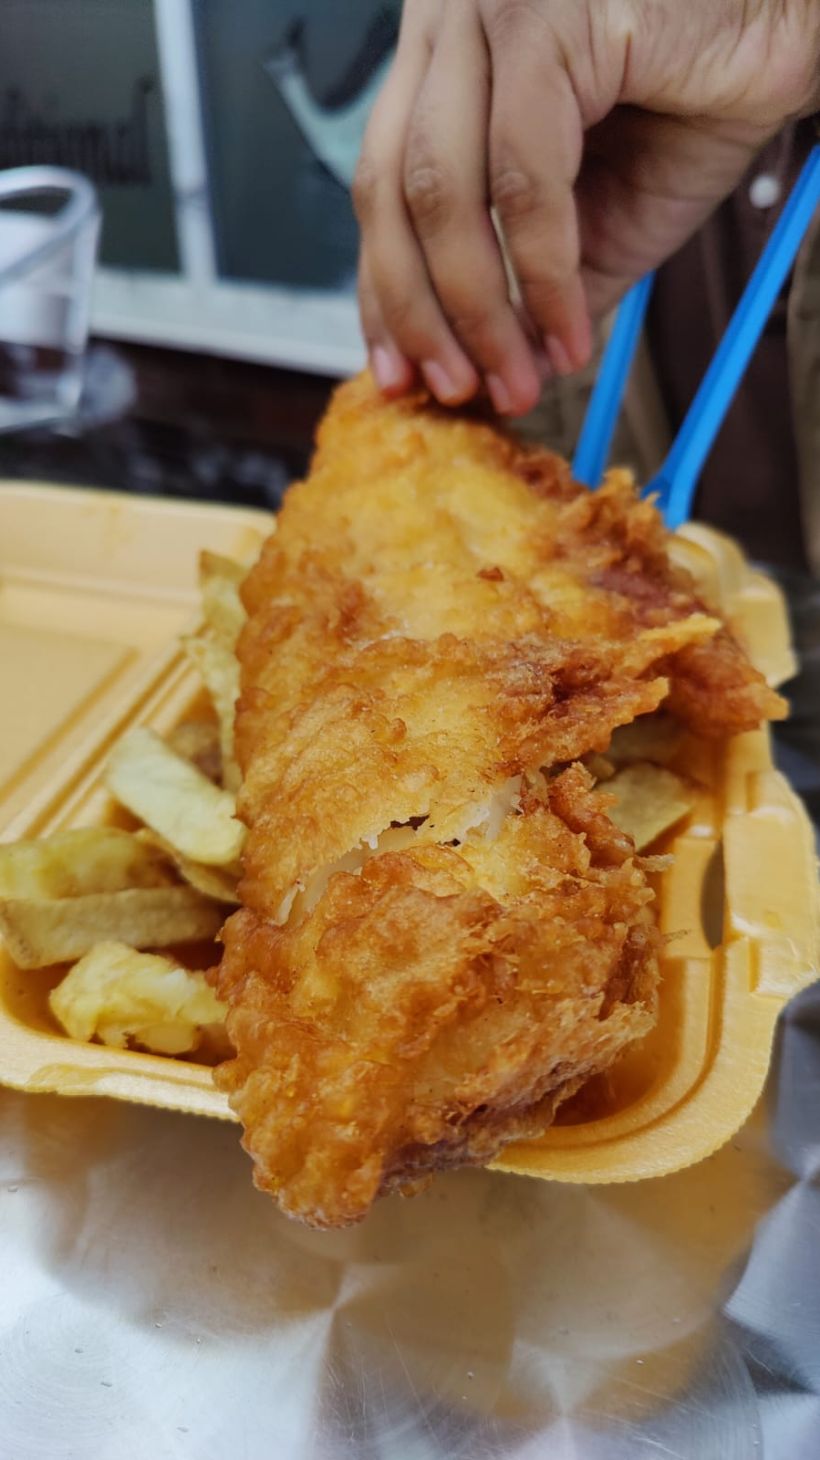 A closeup of a takeout container of fish and chips with Boba's hand grabbing the battered fish to start eating